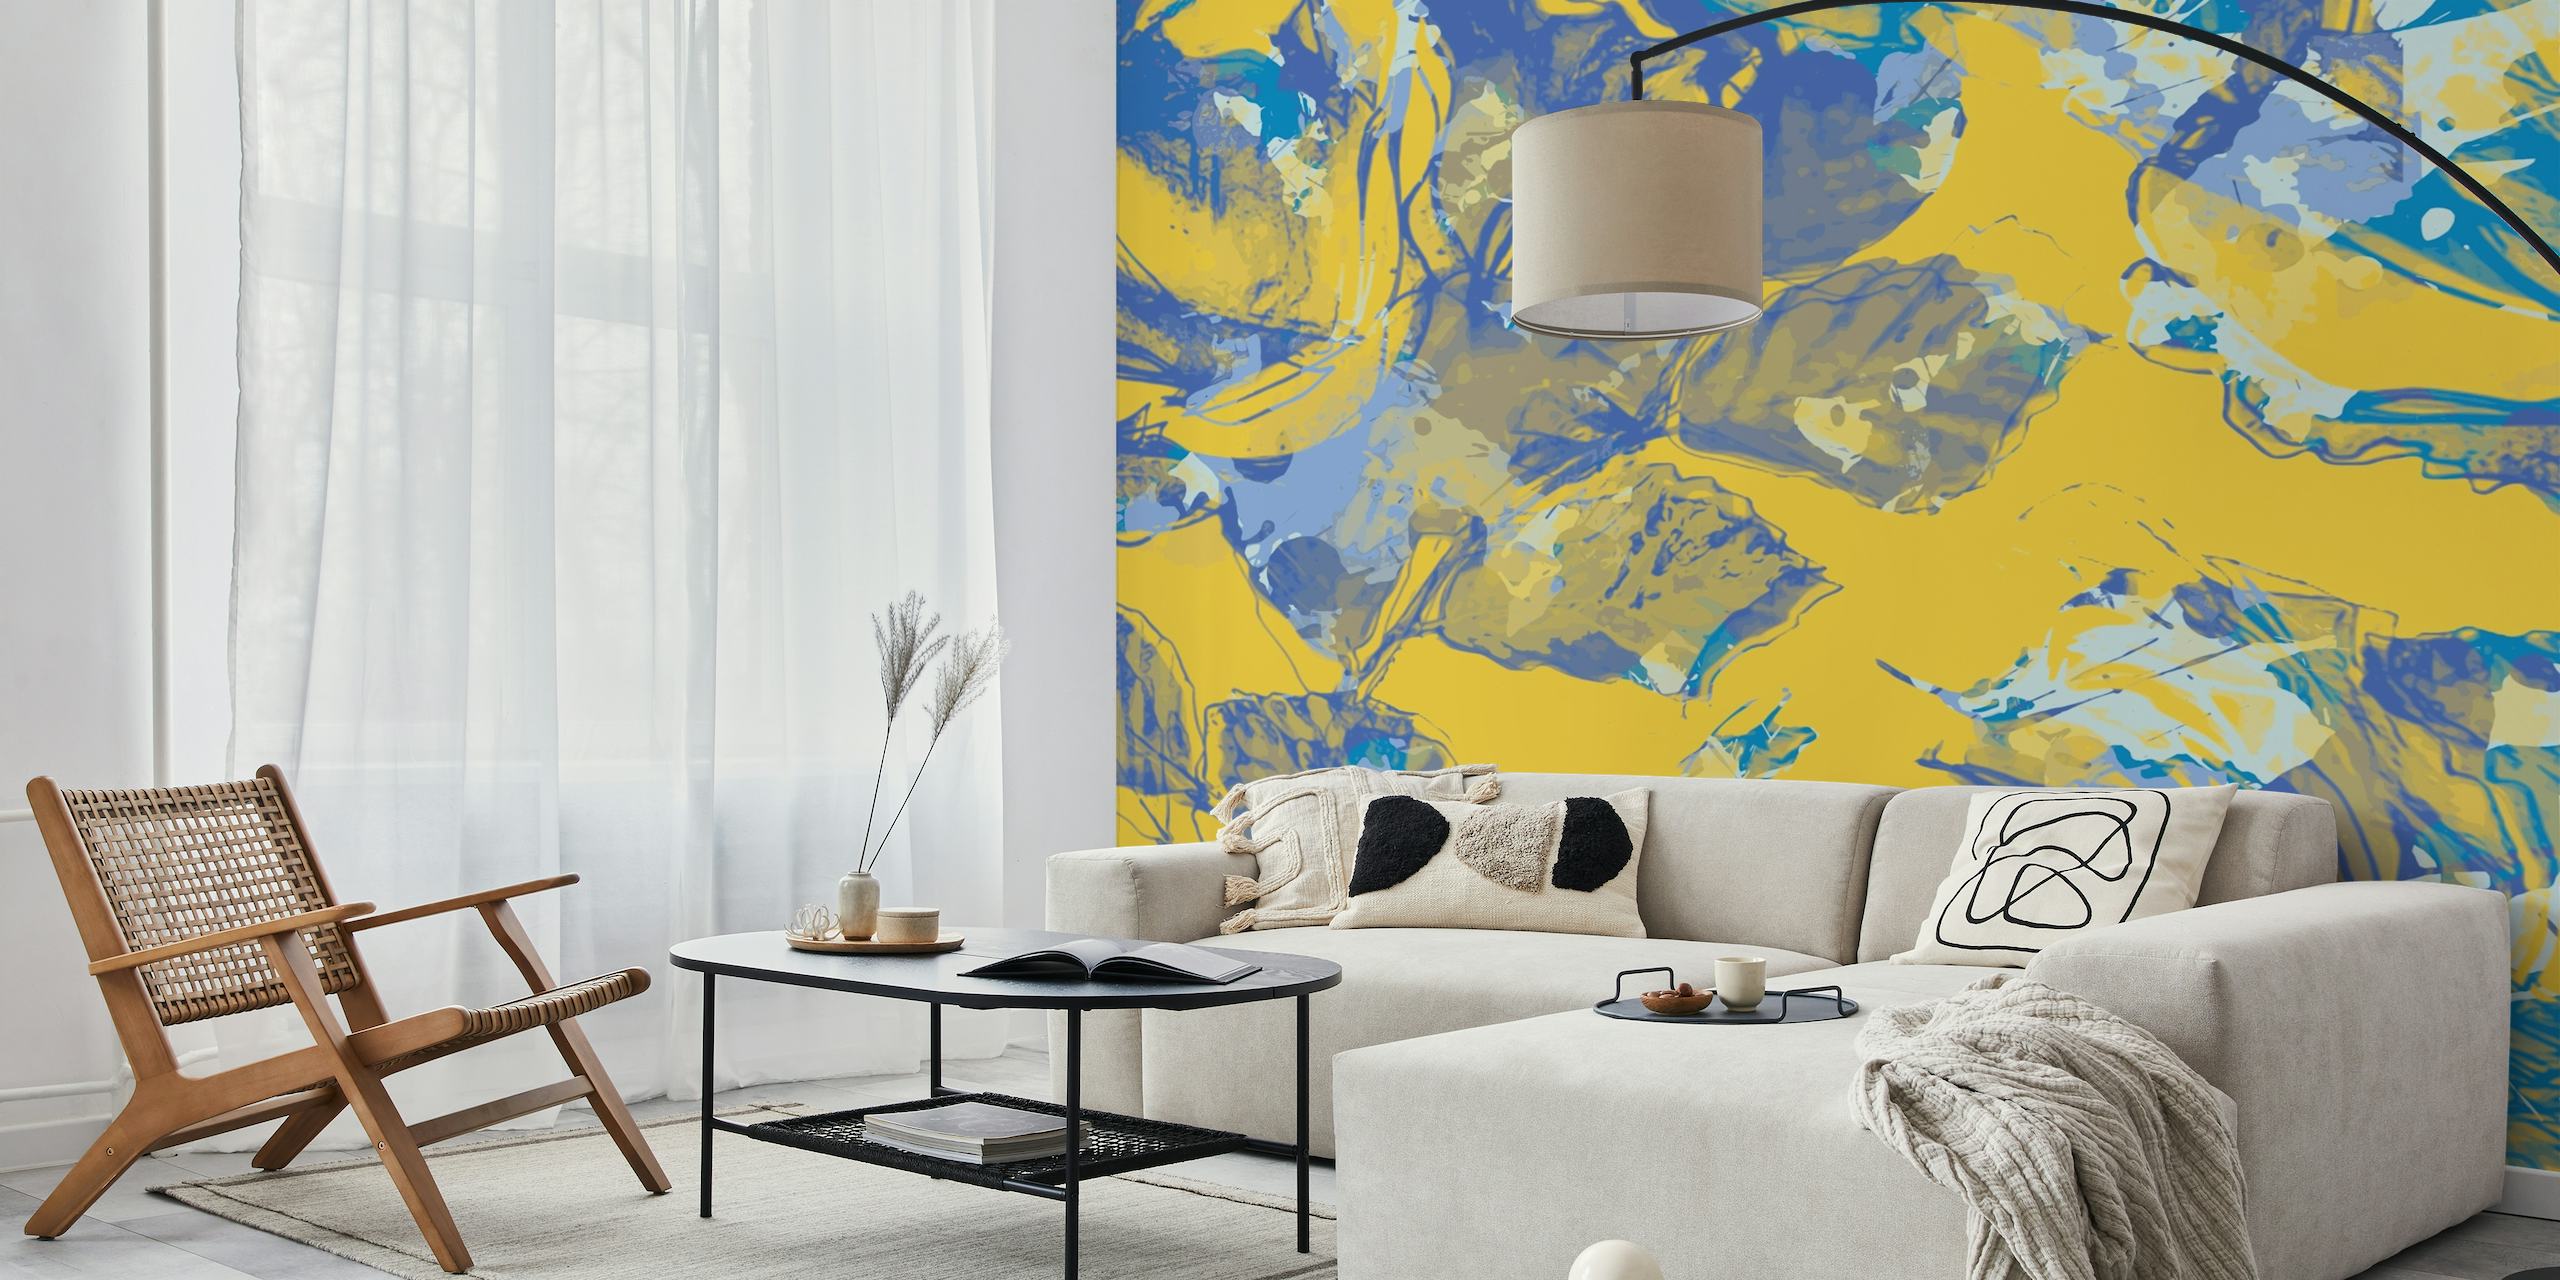 Bright yellow and blue floral wall mural design for a lively summer-themed decor